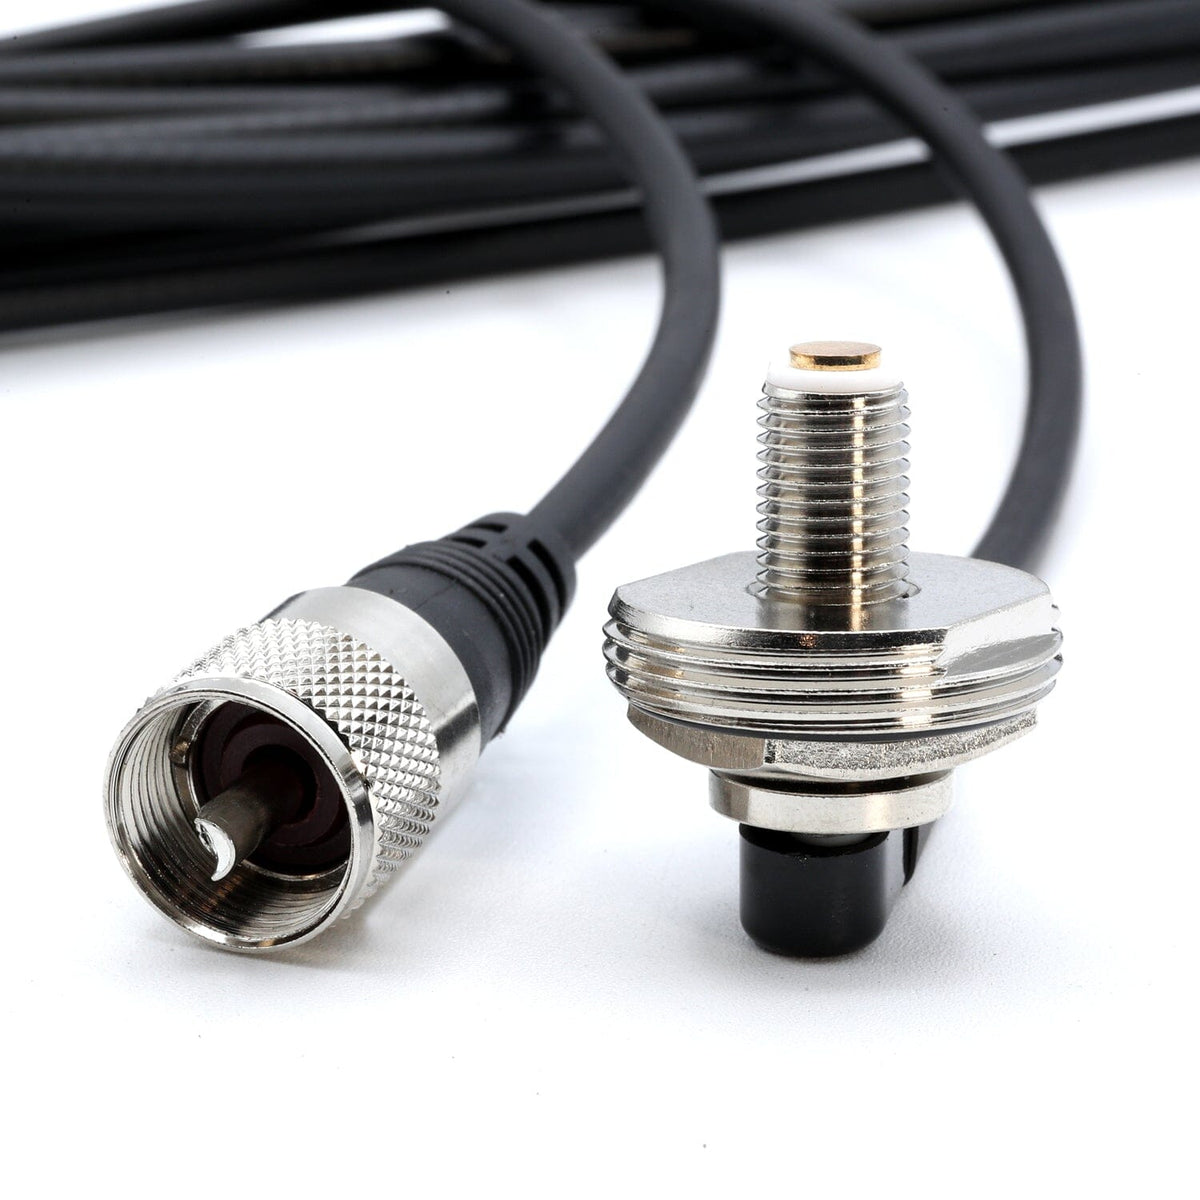 15 Ft Antenna Coax Cable with 3/8 NMO Mount